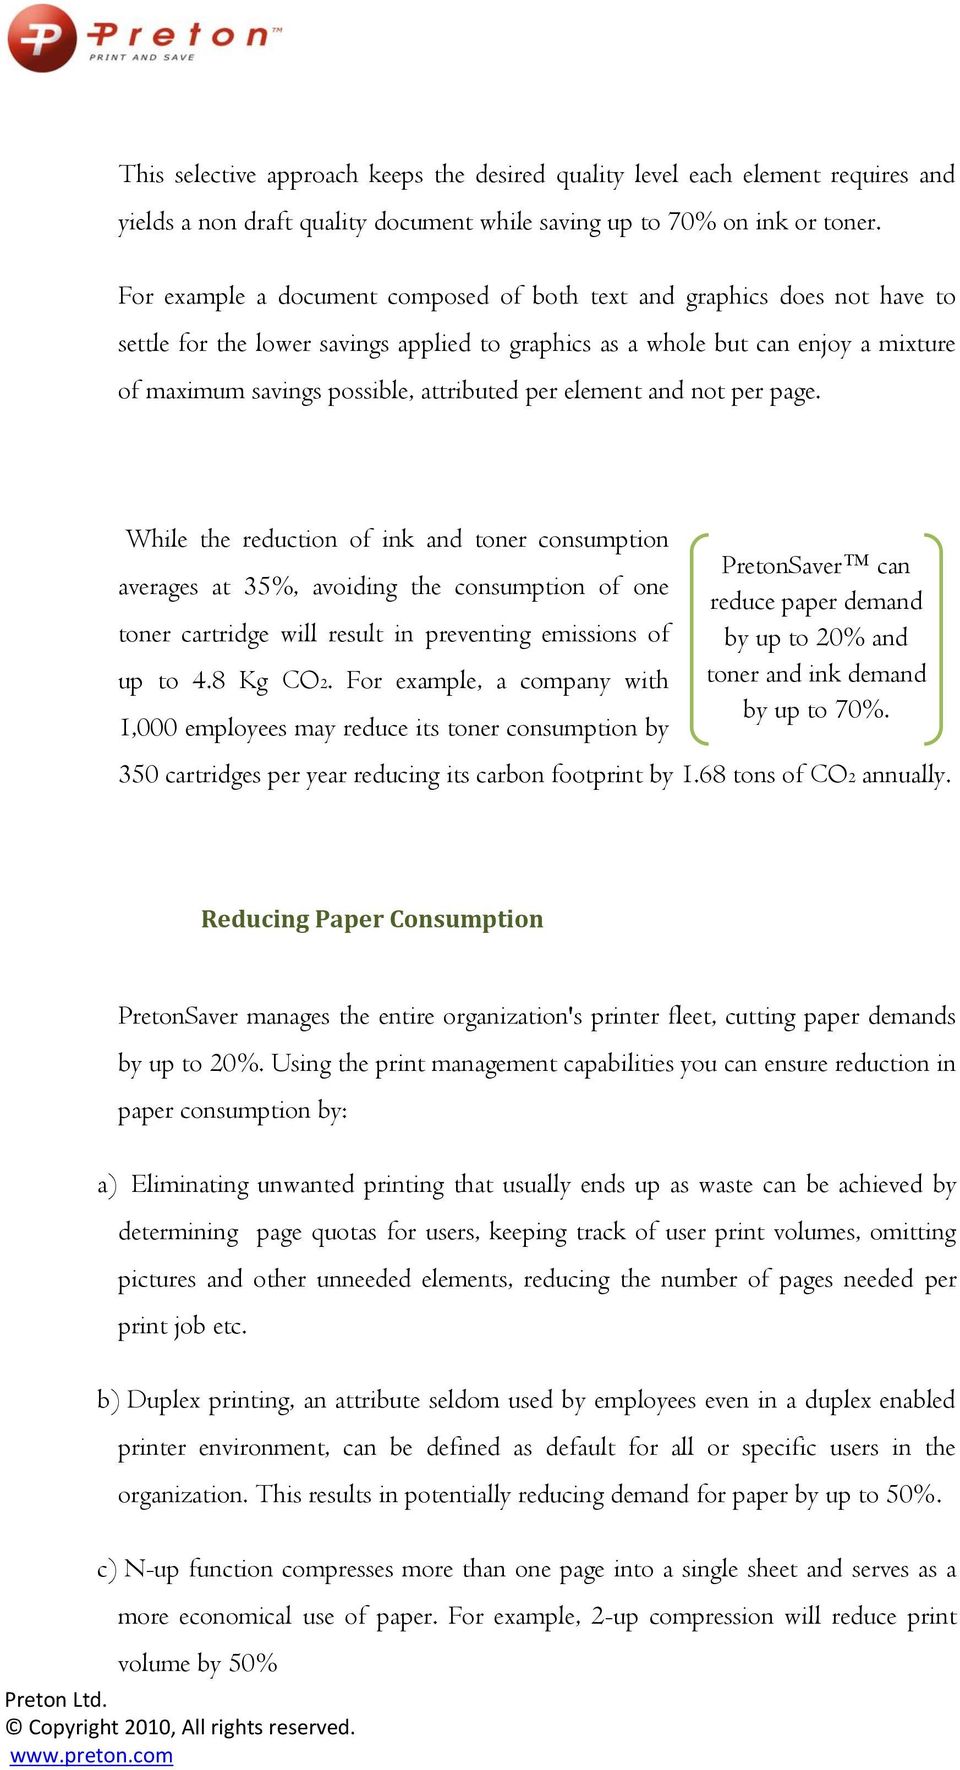 per element and not per page. While the reduction of ink and toner consumption averages at 35%, avoiding the consumption of one toner cartridge will result in preventing emissions of up to 4.8 Kg CO2.